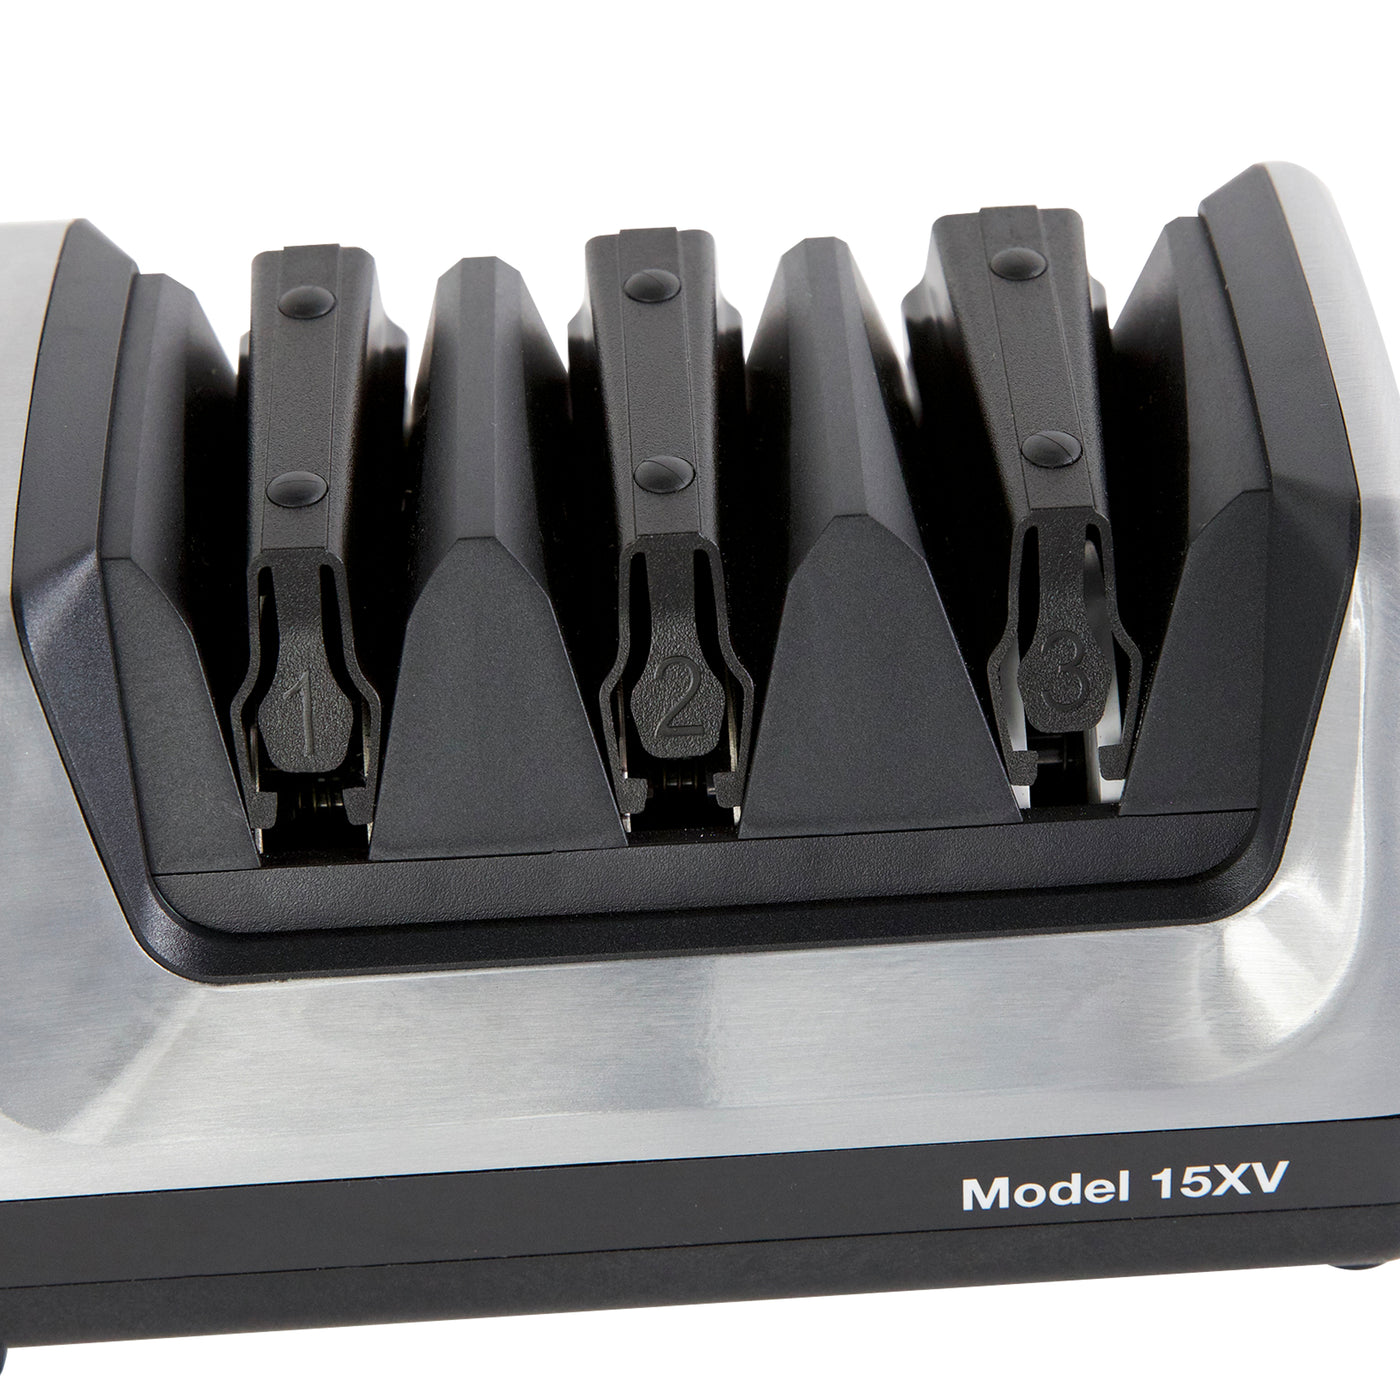 Restore Your Old Knives with the Trizor XV Knife Sharpener! 